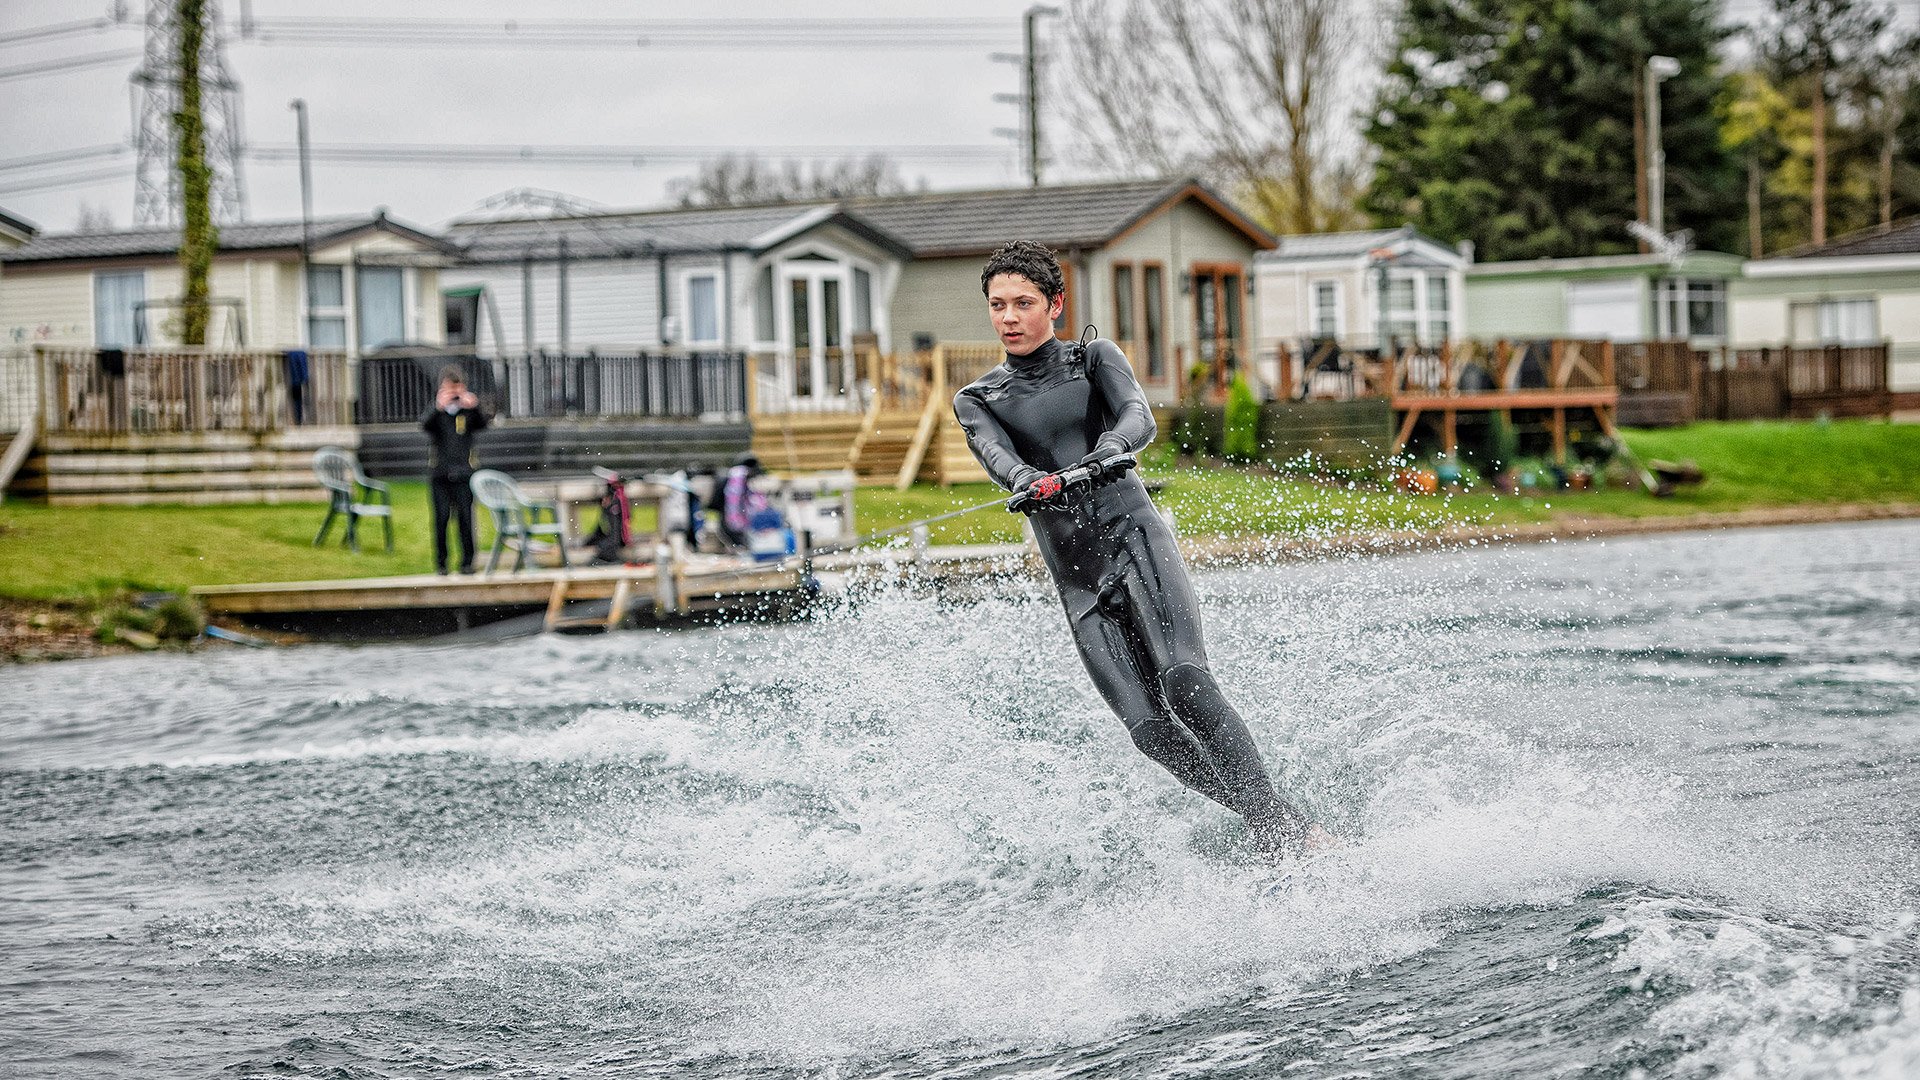 Meet the world record holder who runs a water ski club in Lincoln